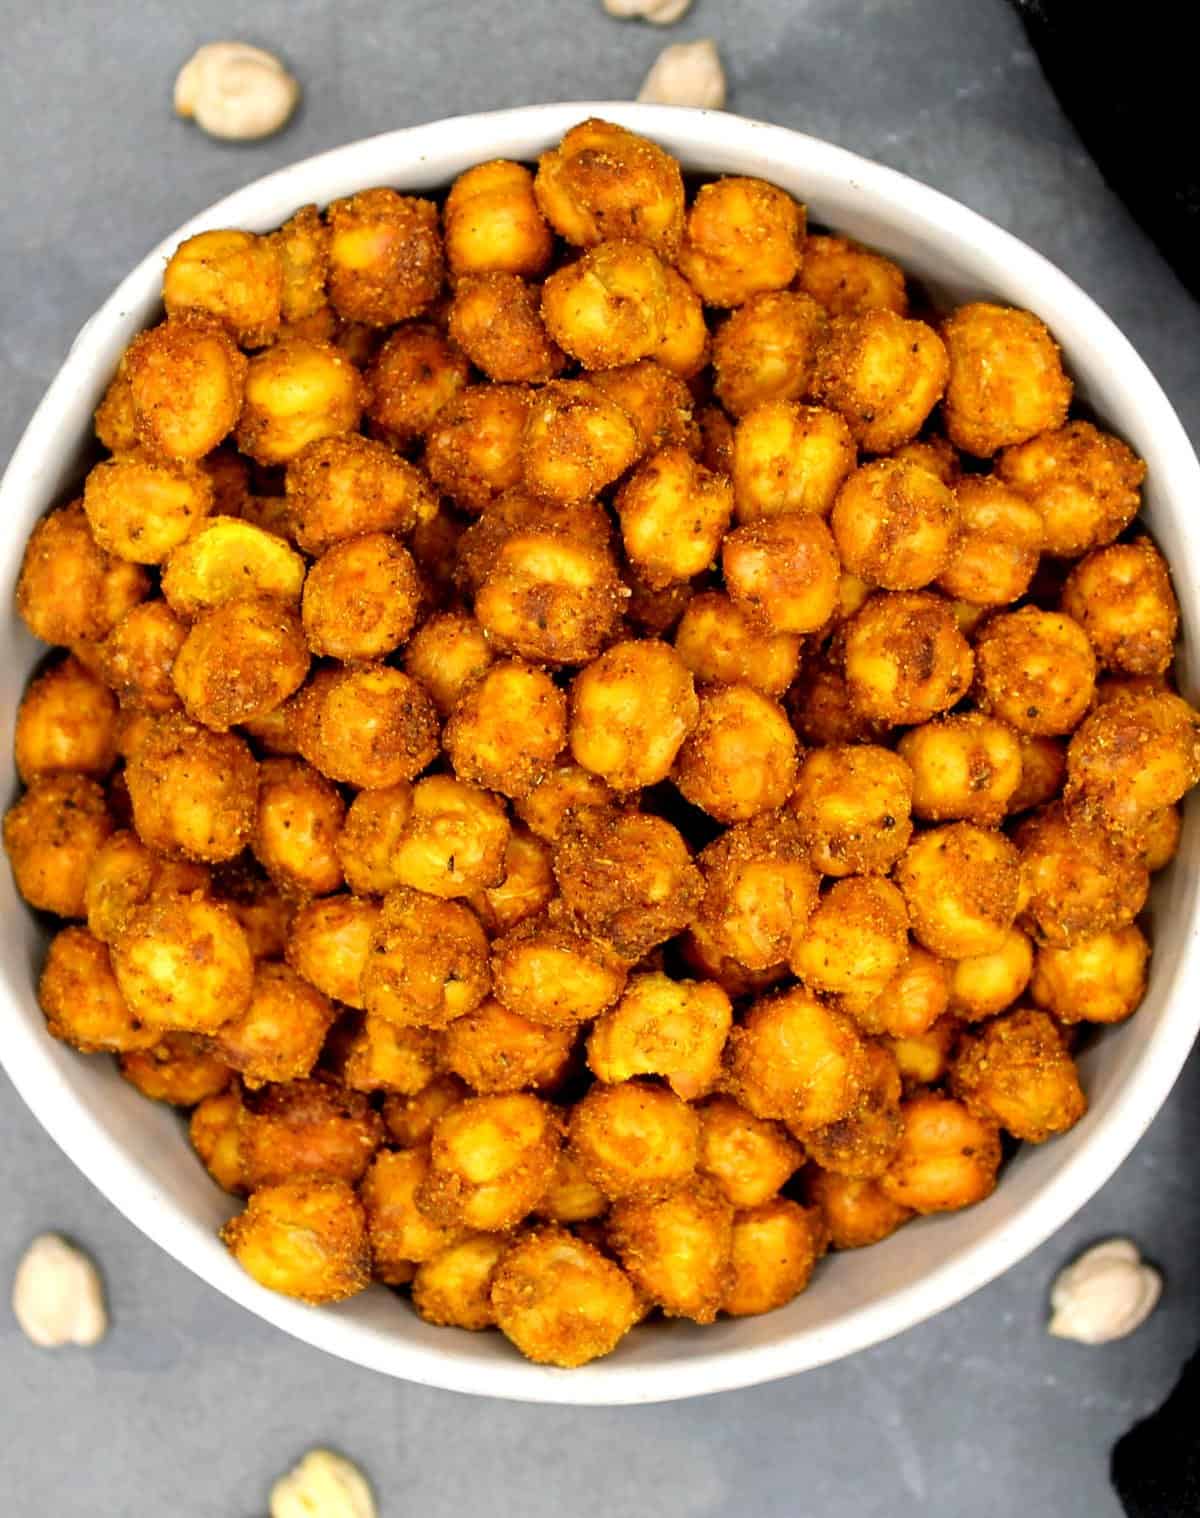 Air fried chickpeas in a gray bowl on darker gray background.